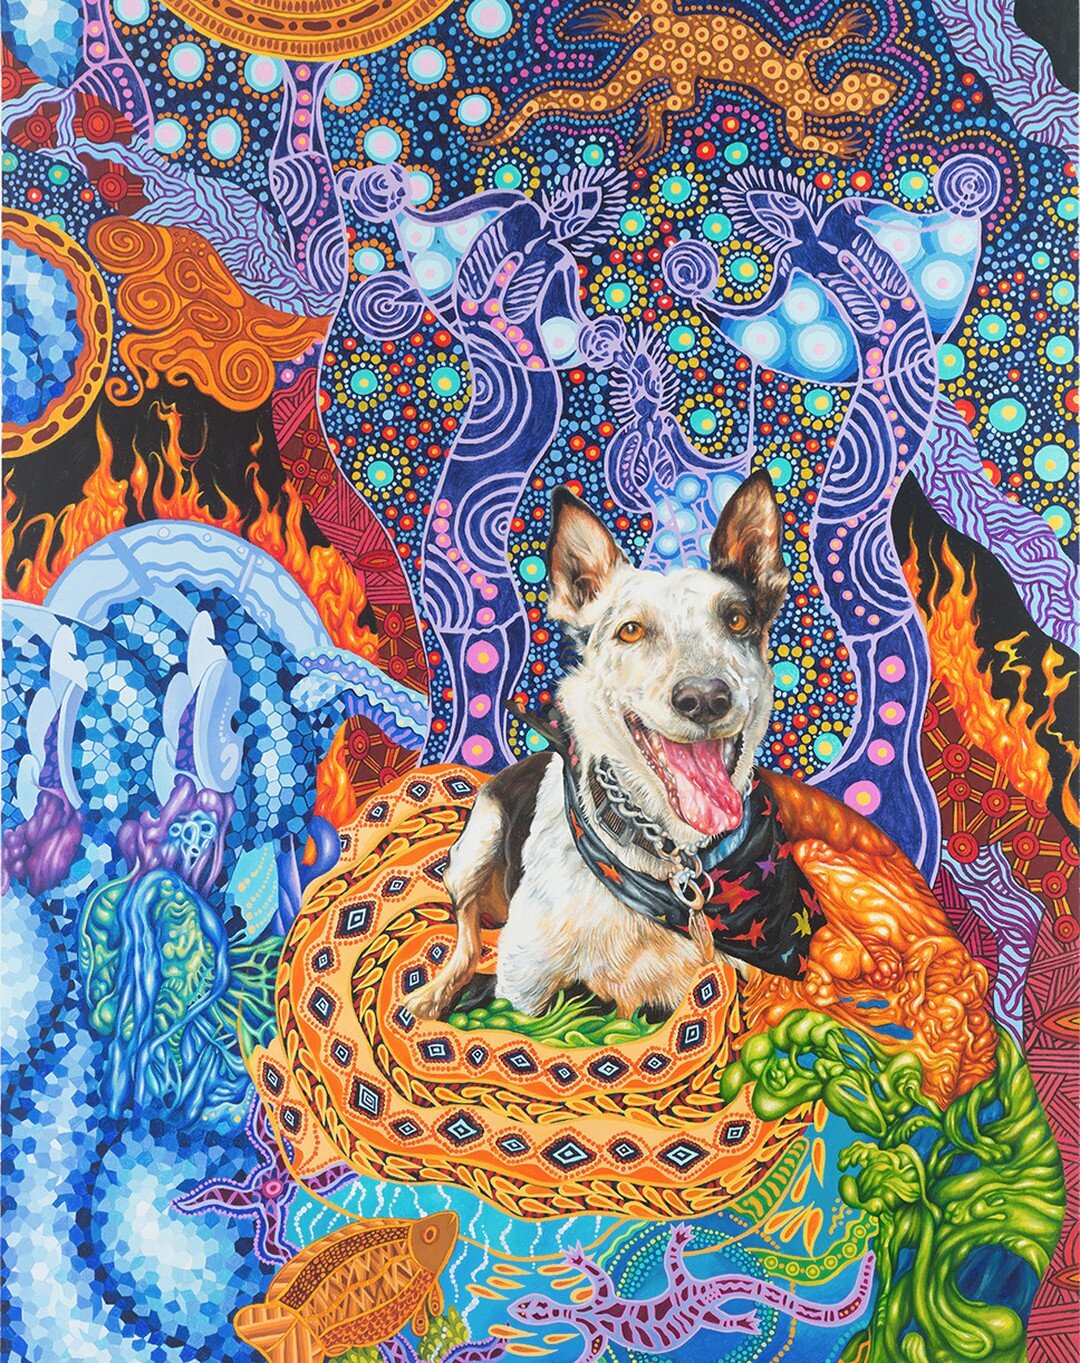 Cypress
Acrylic on Canvas
4ft. x 3ft.

#acrylicpainting #doggielove #puppielove #sanfranciscoartist